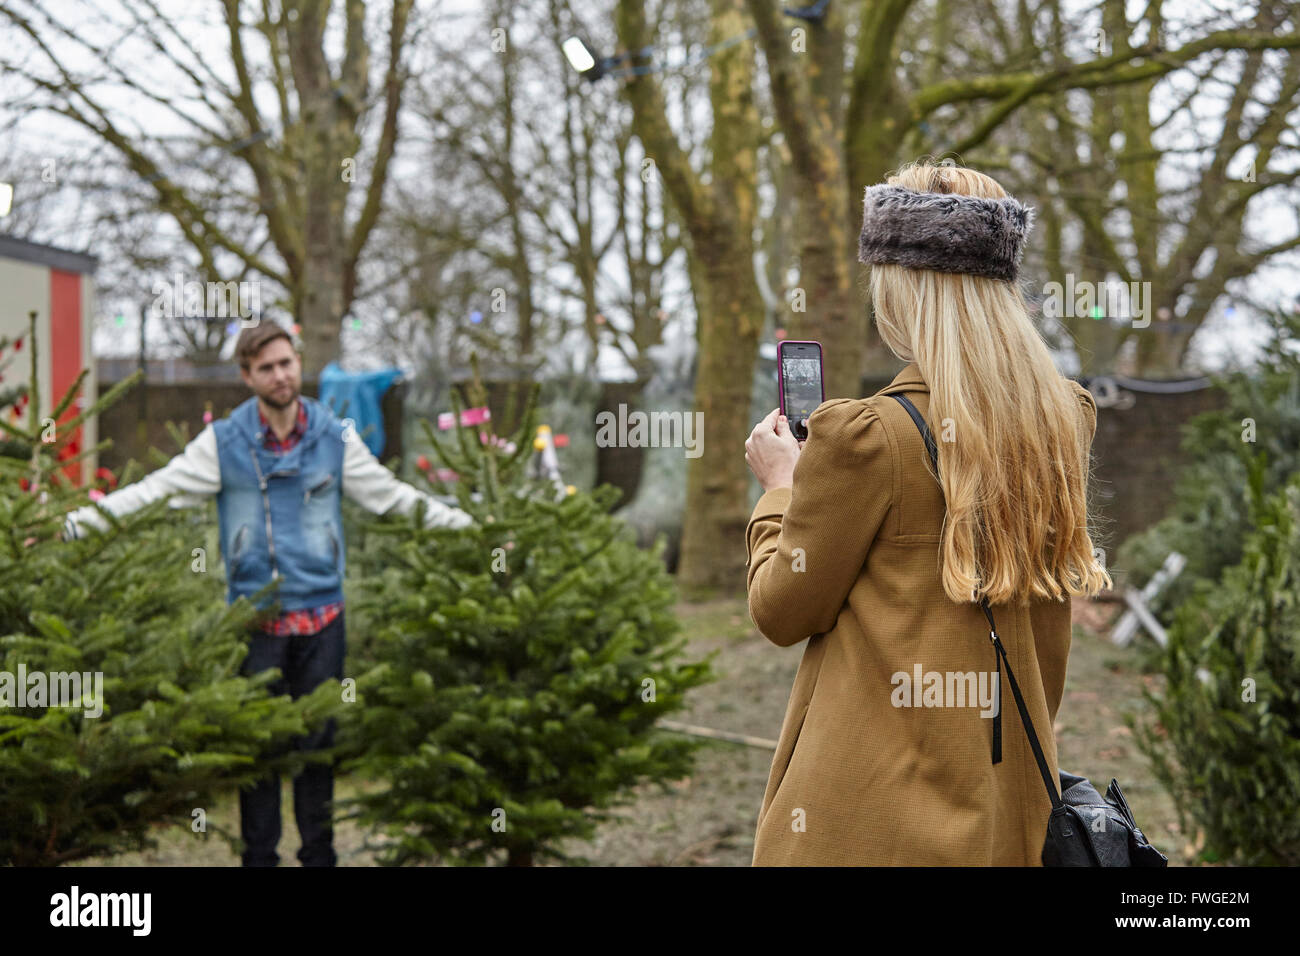 A woman shopping for a Christmas tree, assisted by staff. Stock Photo